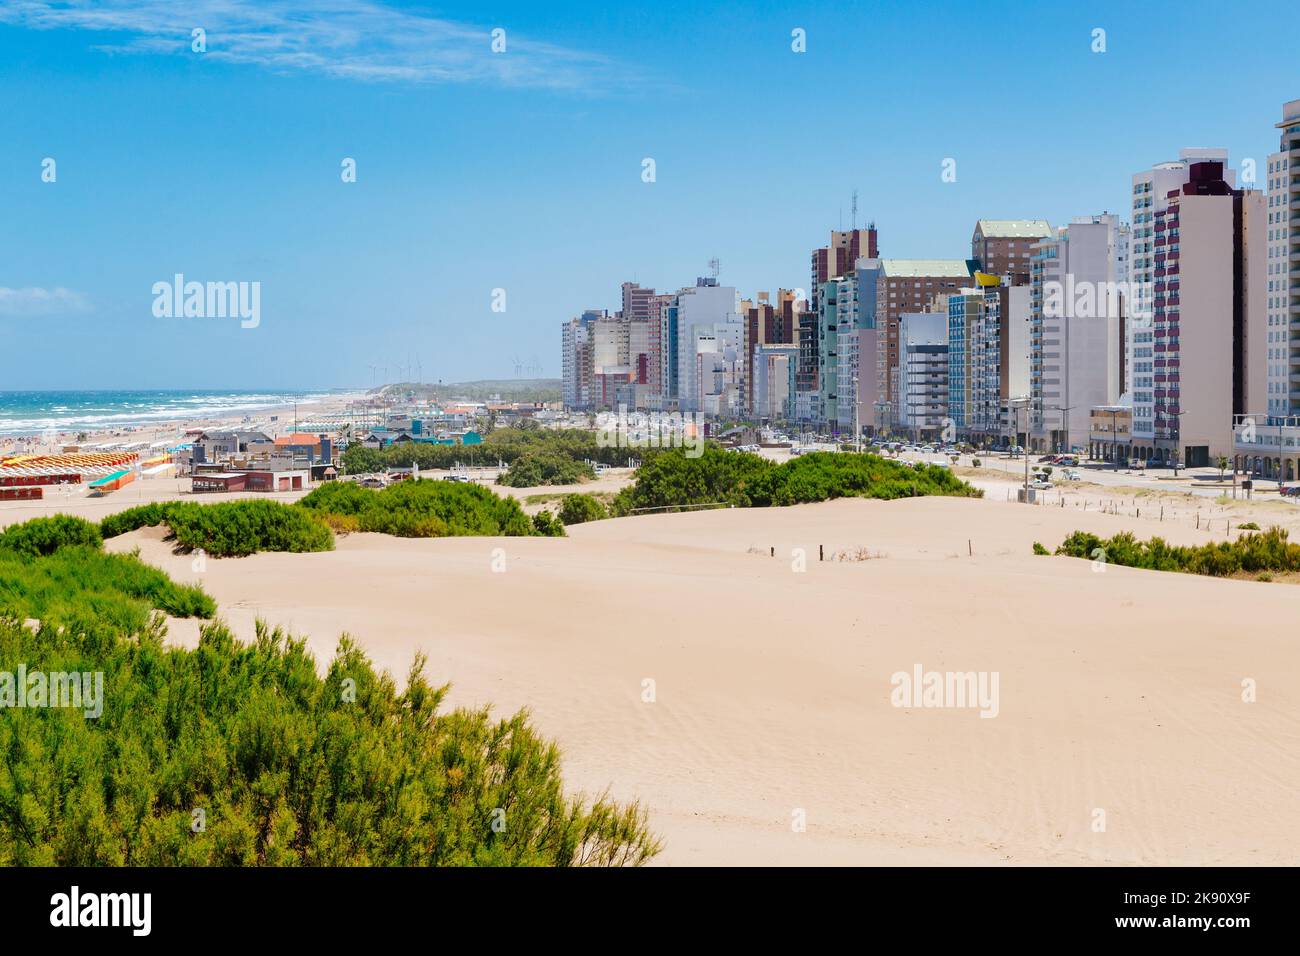 Necochea city, Buenos Aires, Argentina. View of the dunes and Los patos beach. The city at background. Stock Photo